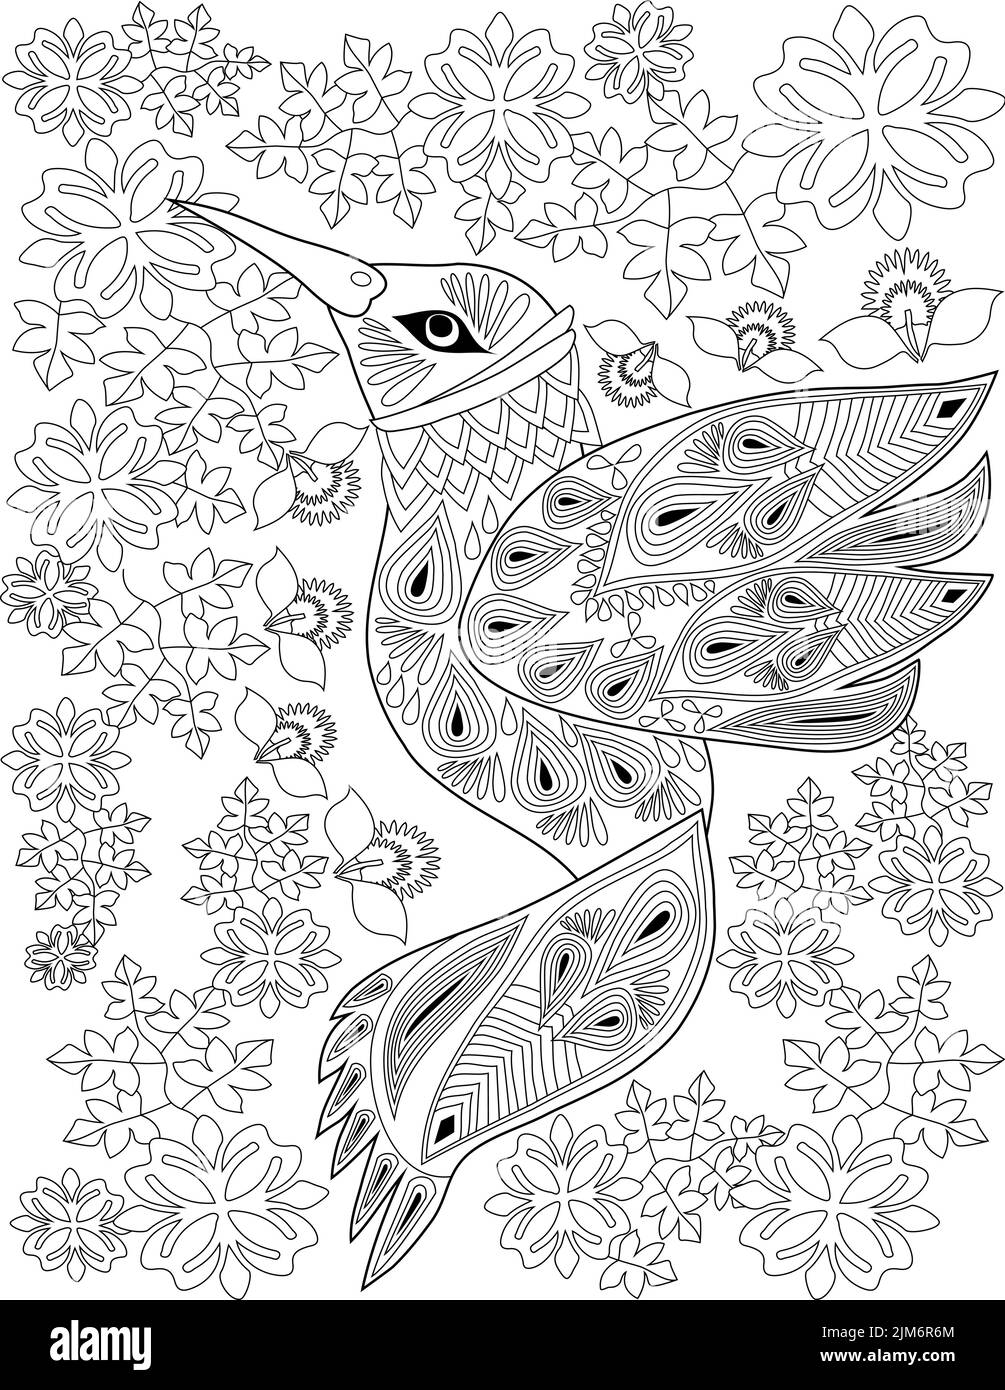 Coloring Book Page With Beautiful Bird With Different Flowers In Background. Sheet To Be Colored With Detailed Flying Creature With Various Plants In Stock Vector